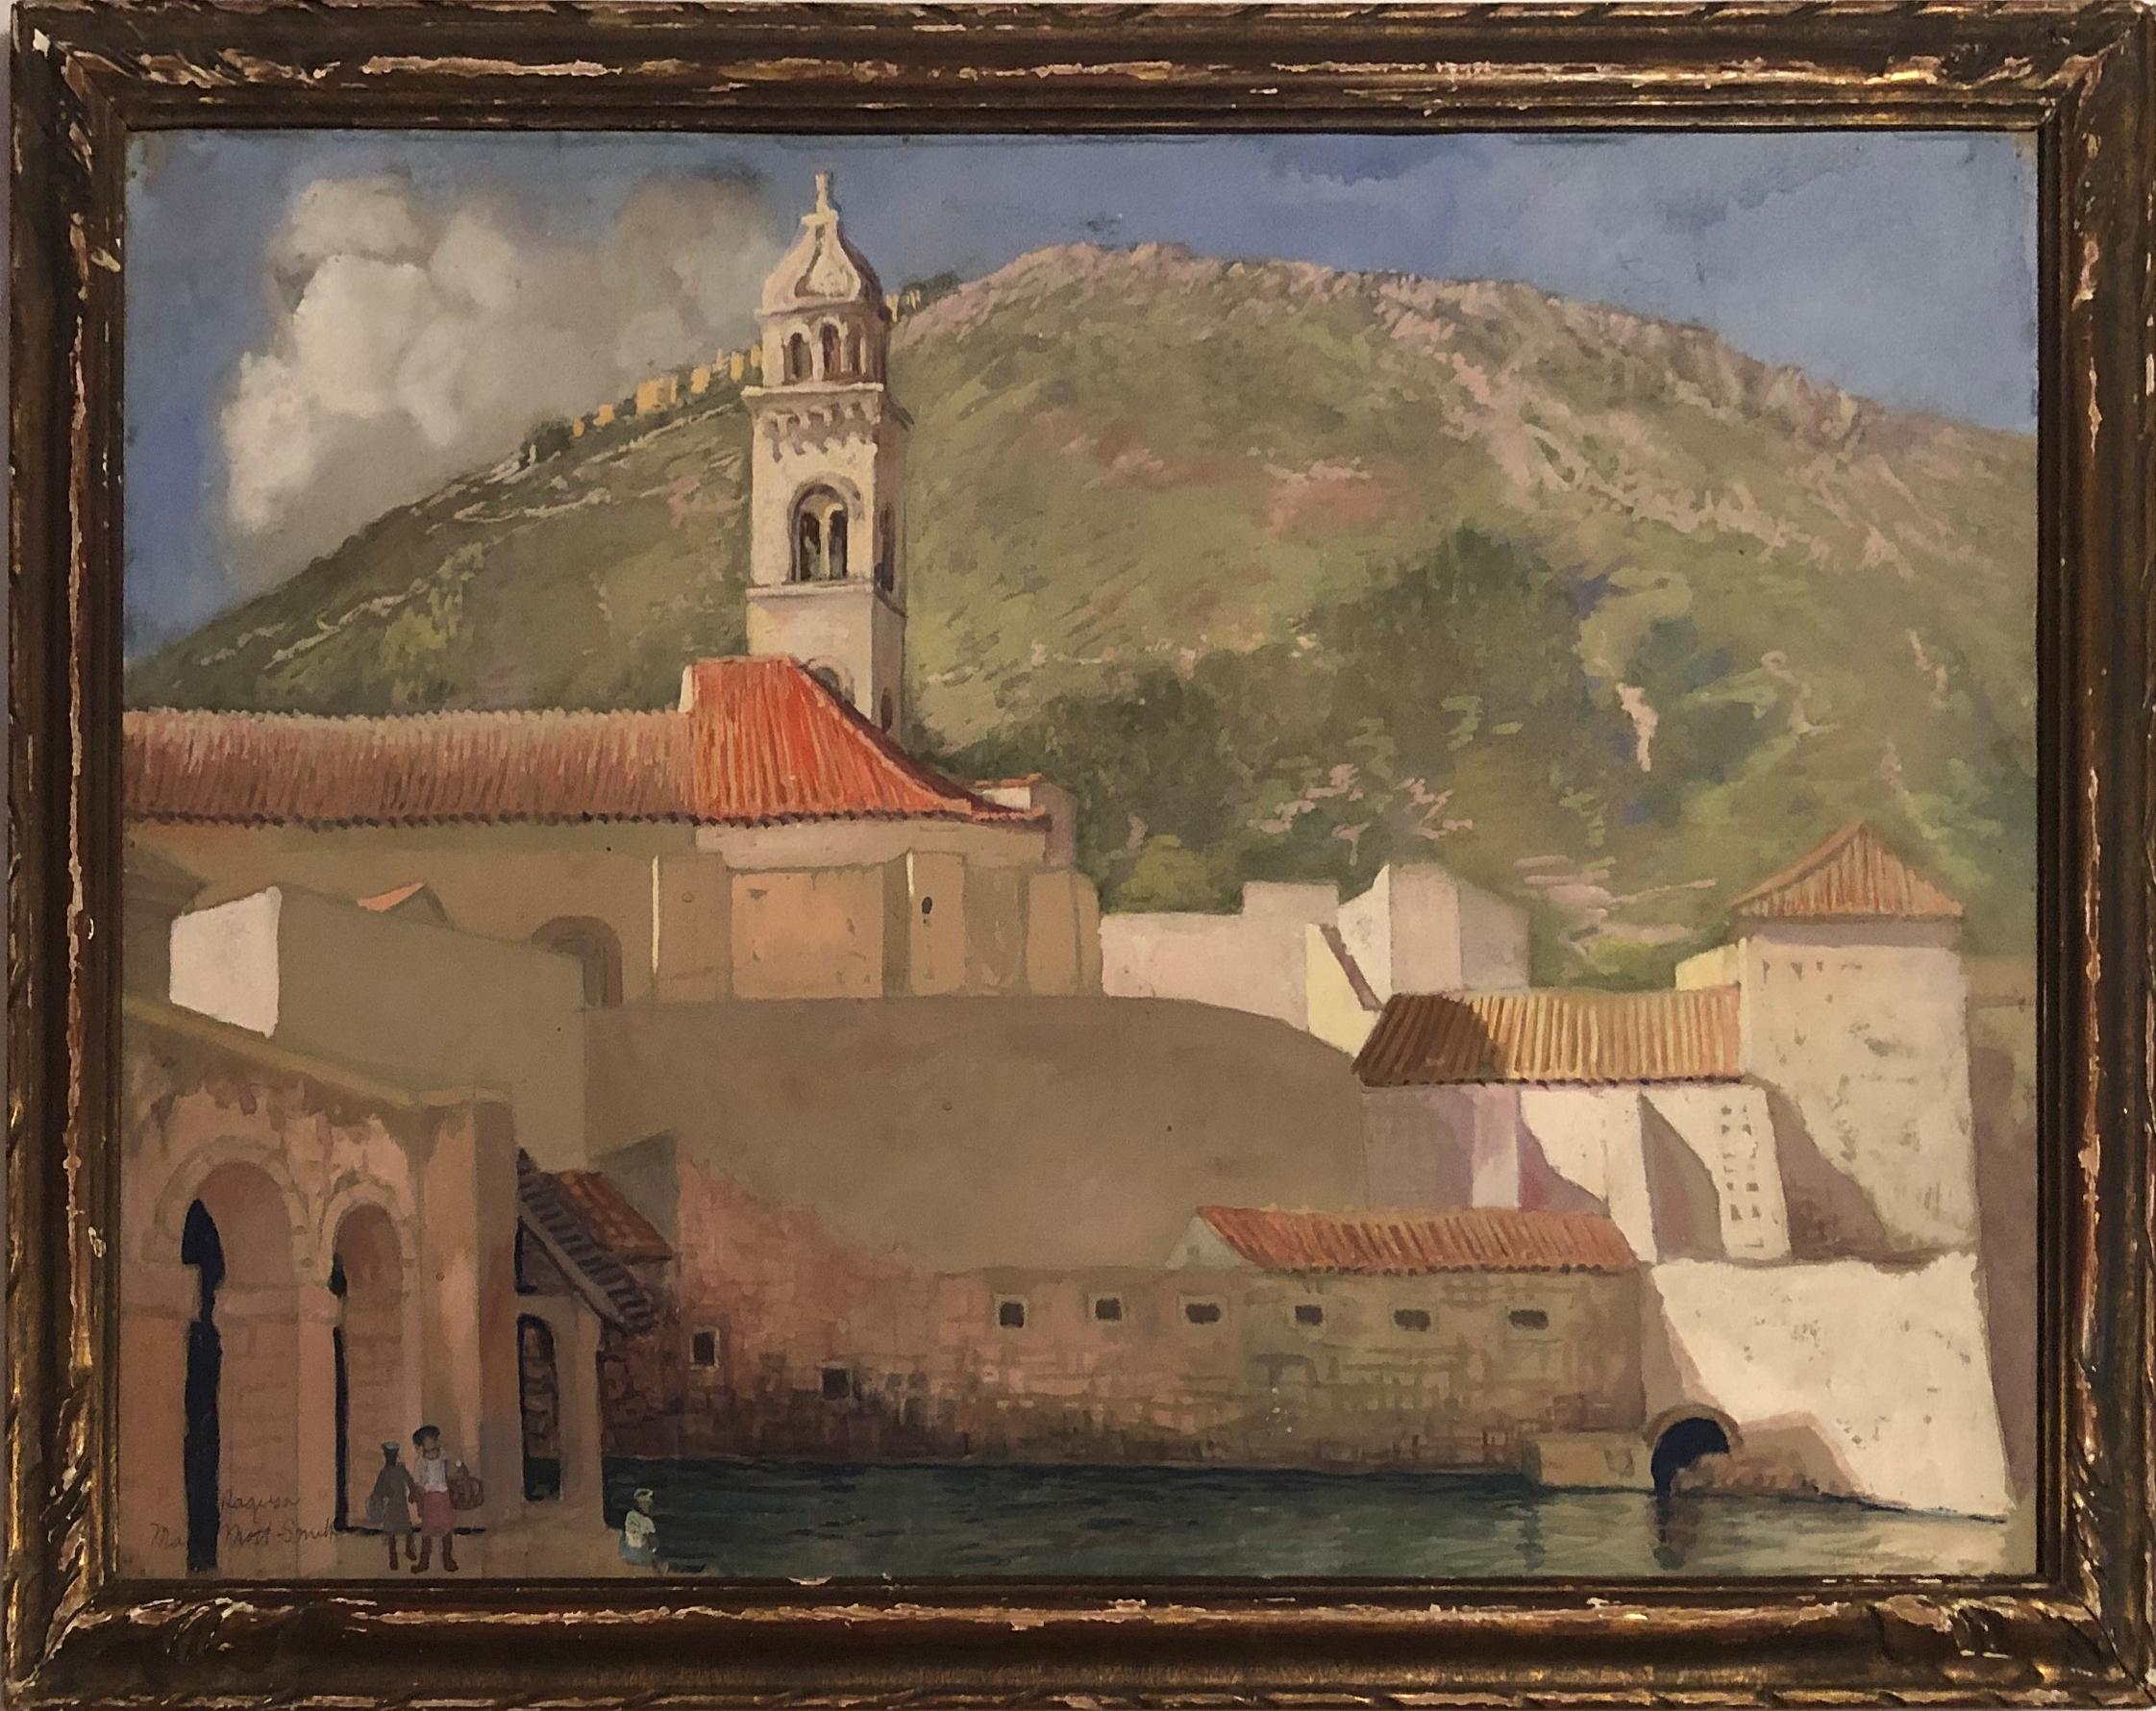 May Mott Smith (1879 - 1952)
Dubrovnik (Ragusa) Harbor Scene, Croatia, circa 1930
Watercolor on paper
15 x 22 inches
Signed and titled lower left

Provenance:
Private Collection, Connecticut
The Old Canaan Market, Canaan, Connecticut

May Mott-Smith